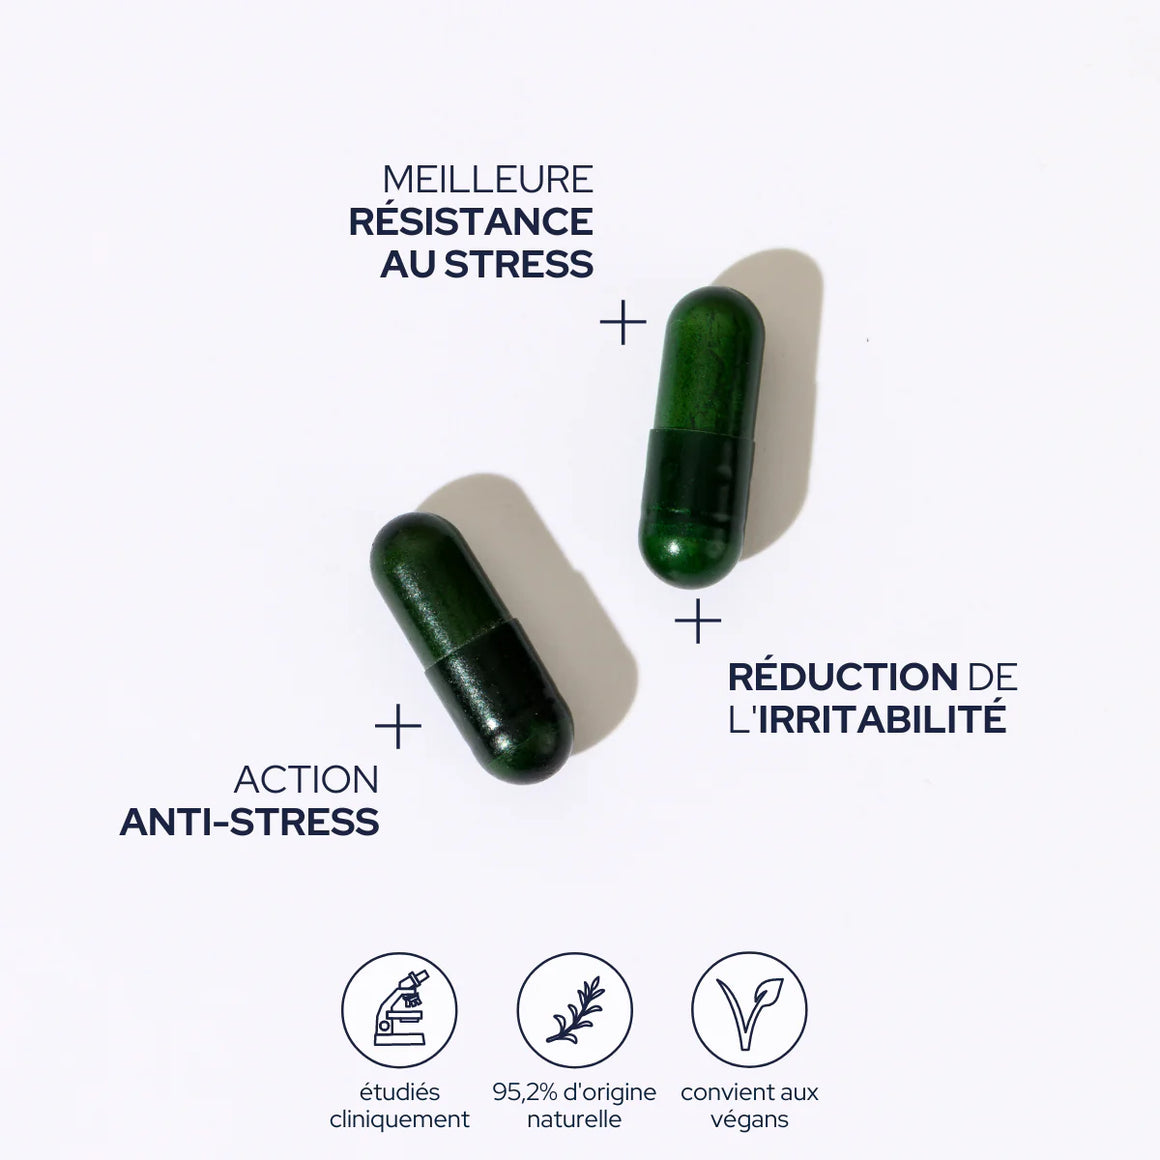 Complex Anti-Stress Treatment - 1 Month Cure by Epycure Tablet info